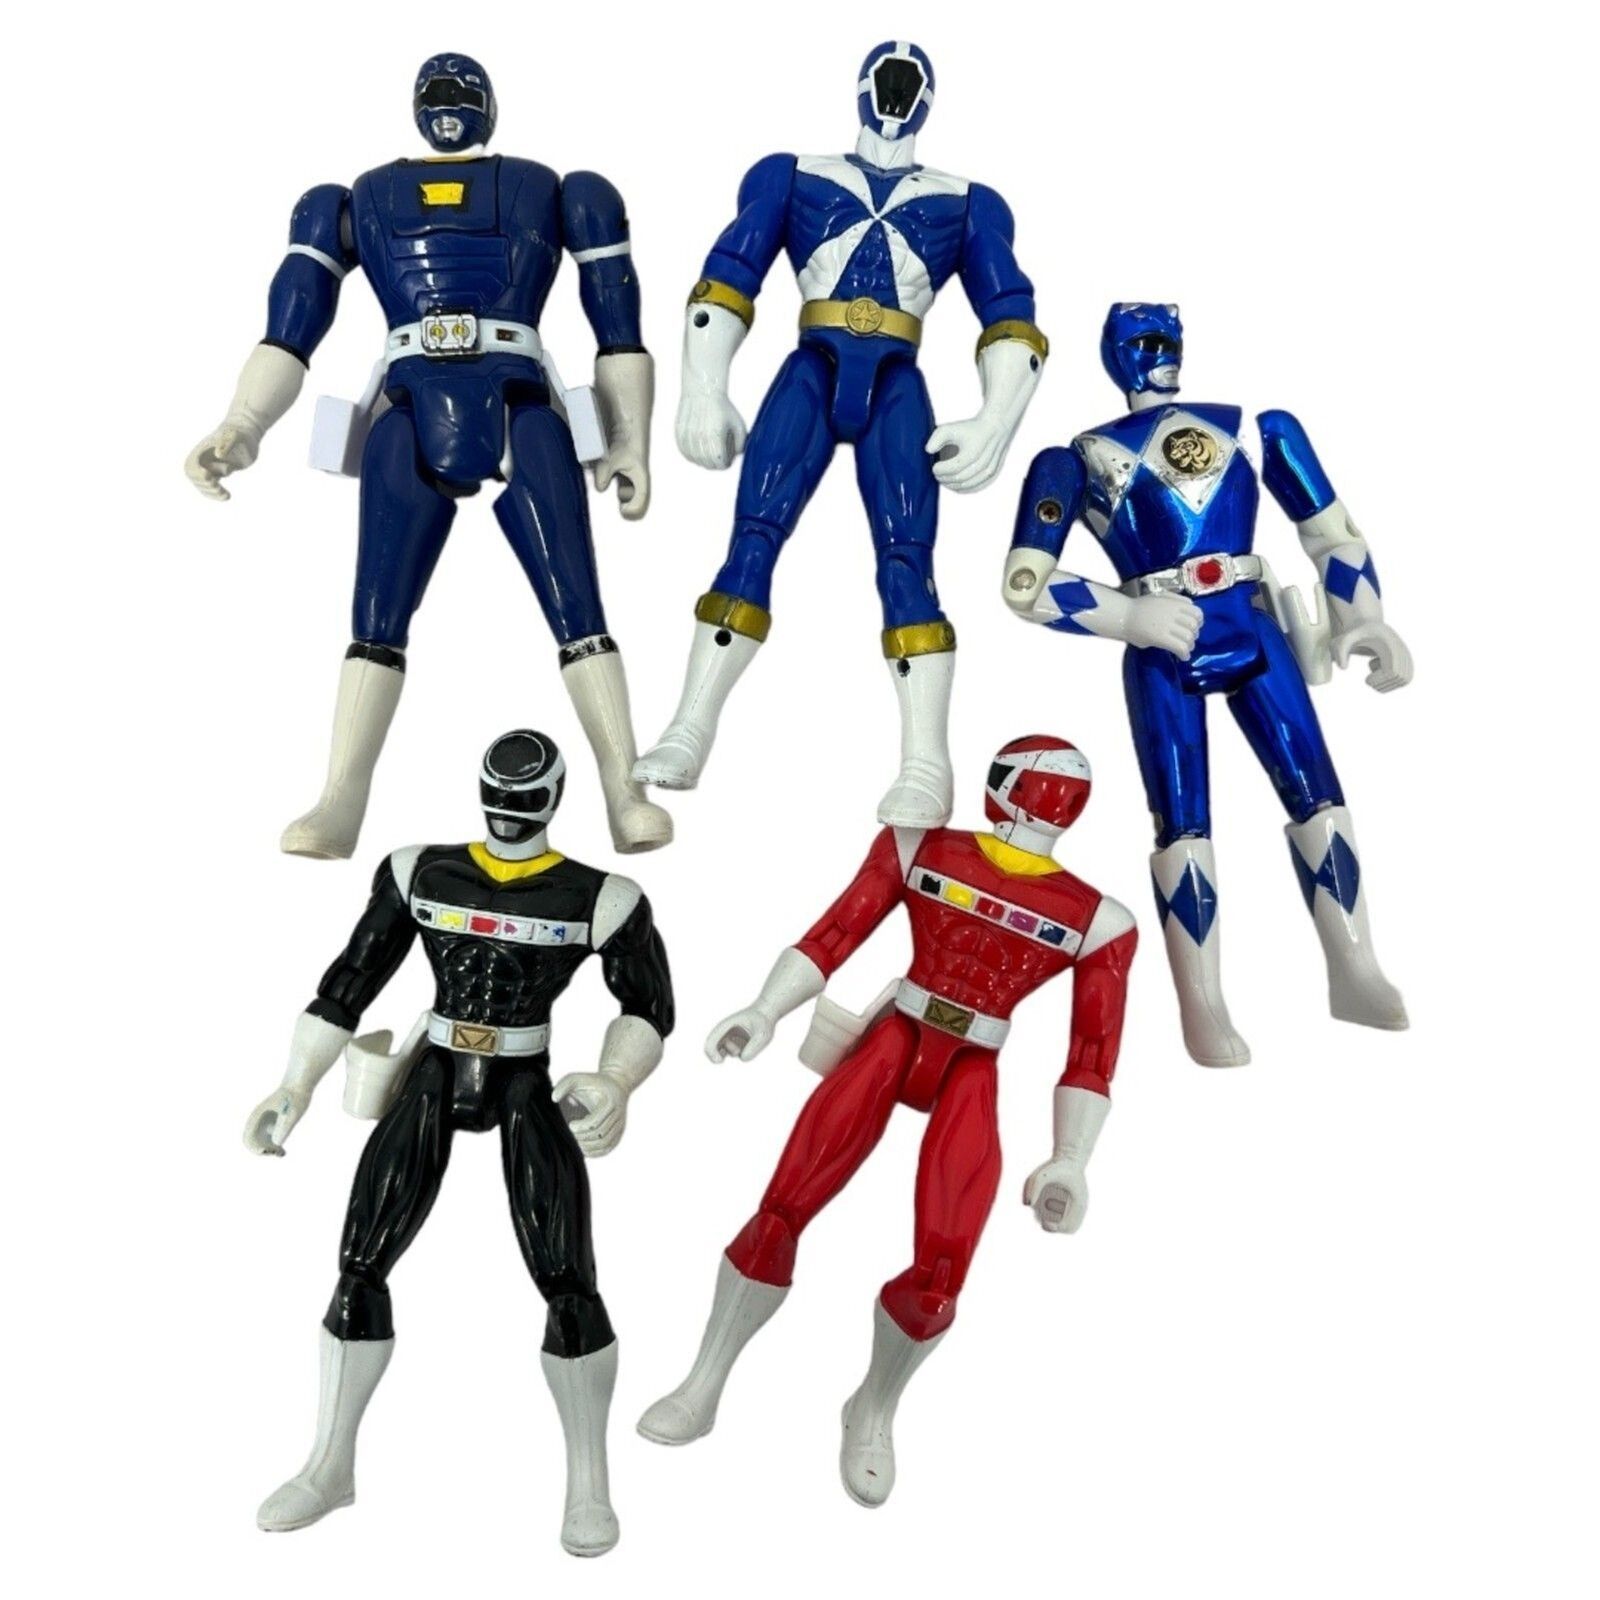 Lot of Vintage Power Ranger Figurines Lot of 5 from the 1990's  - $26.73